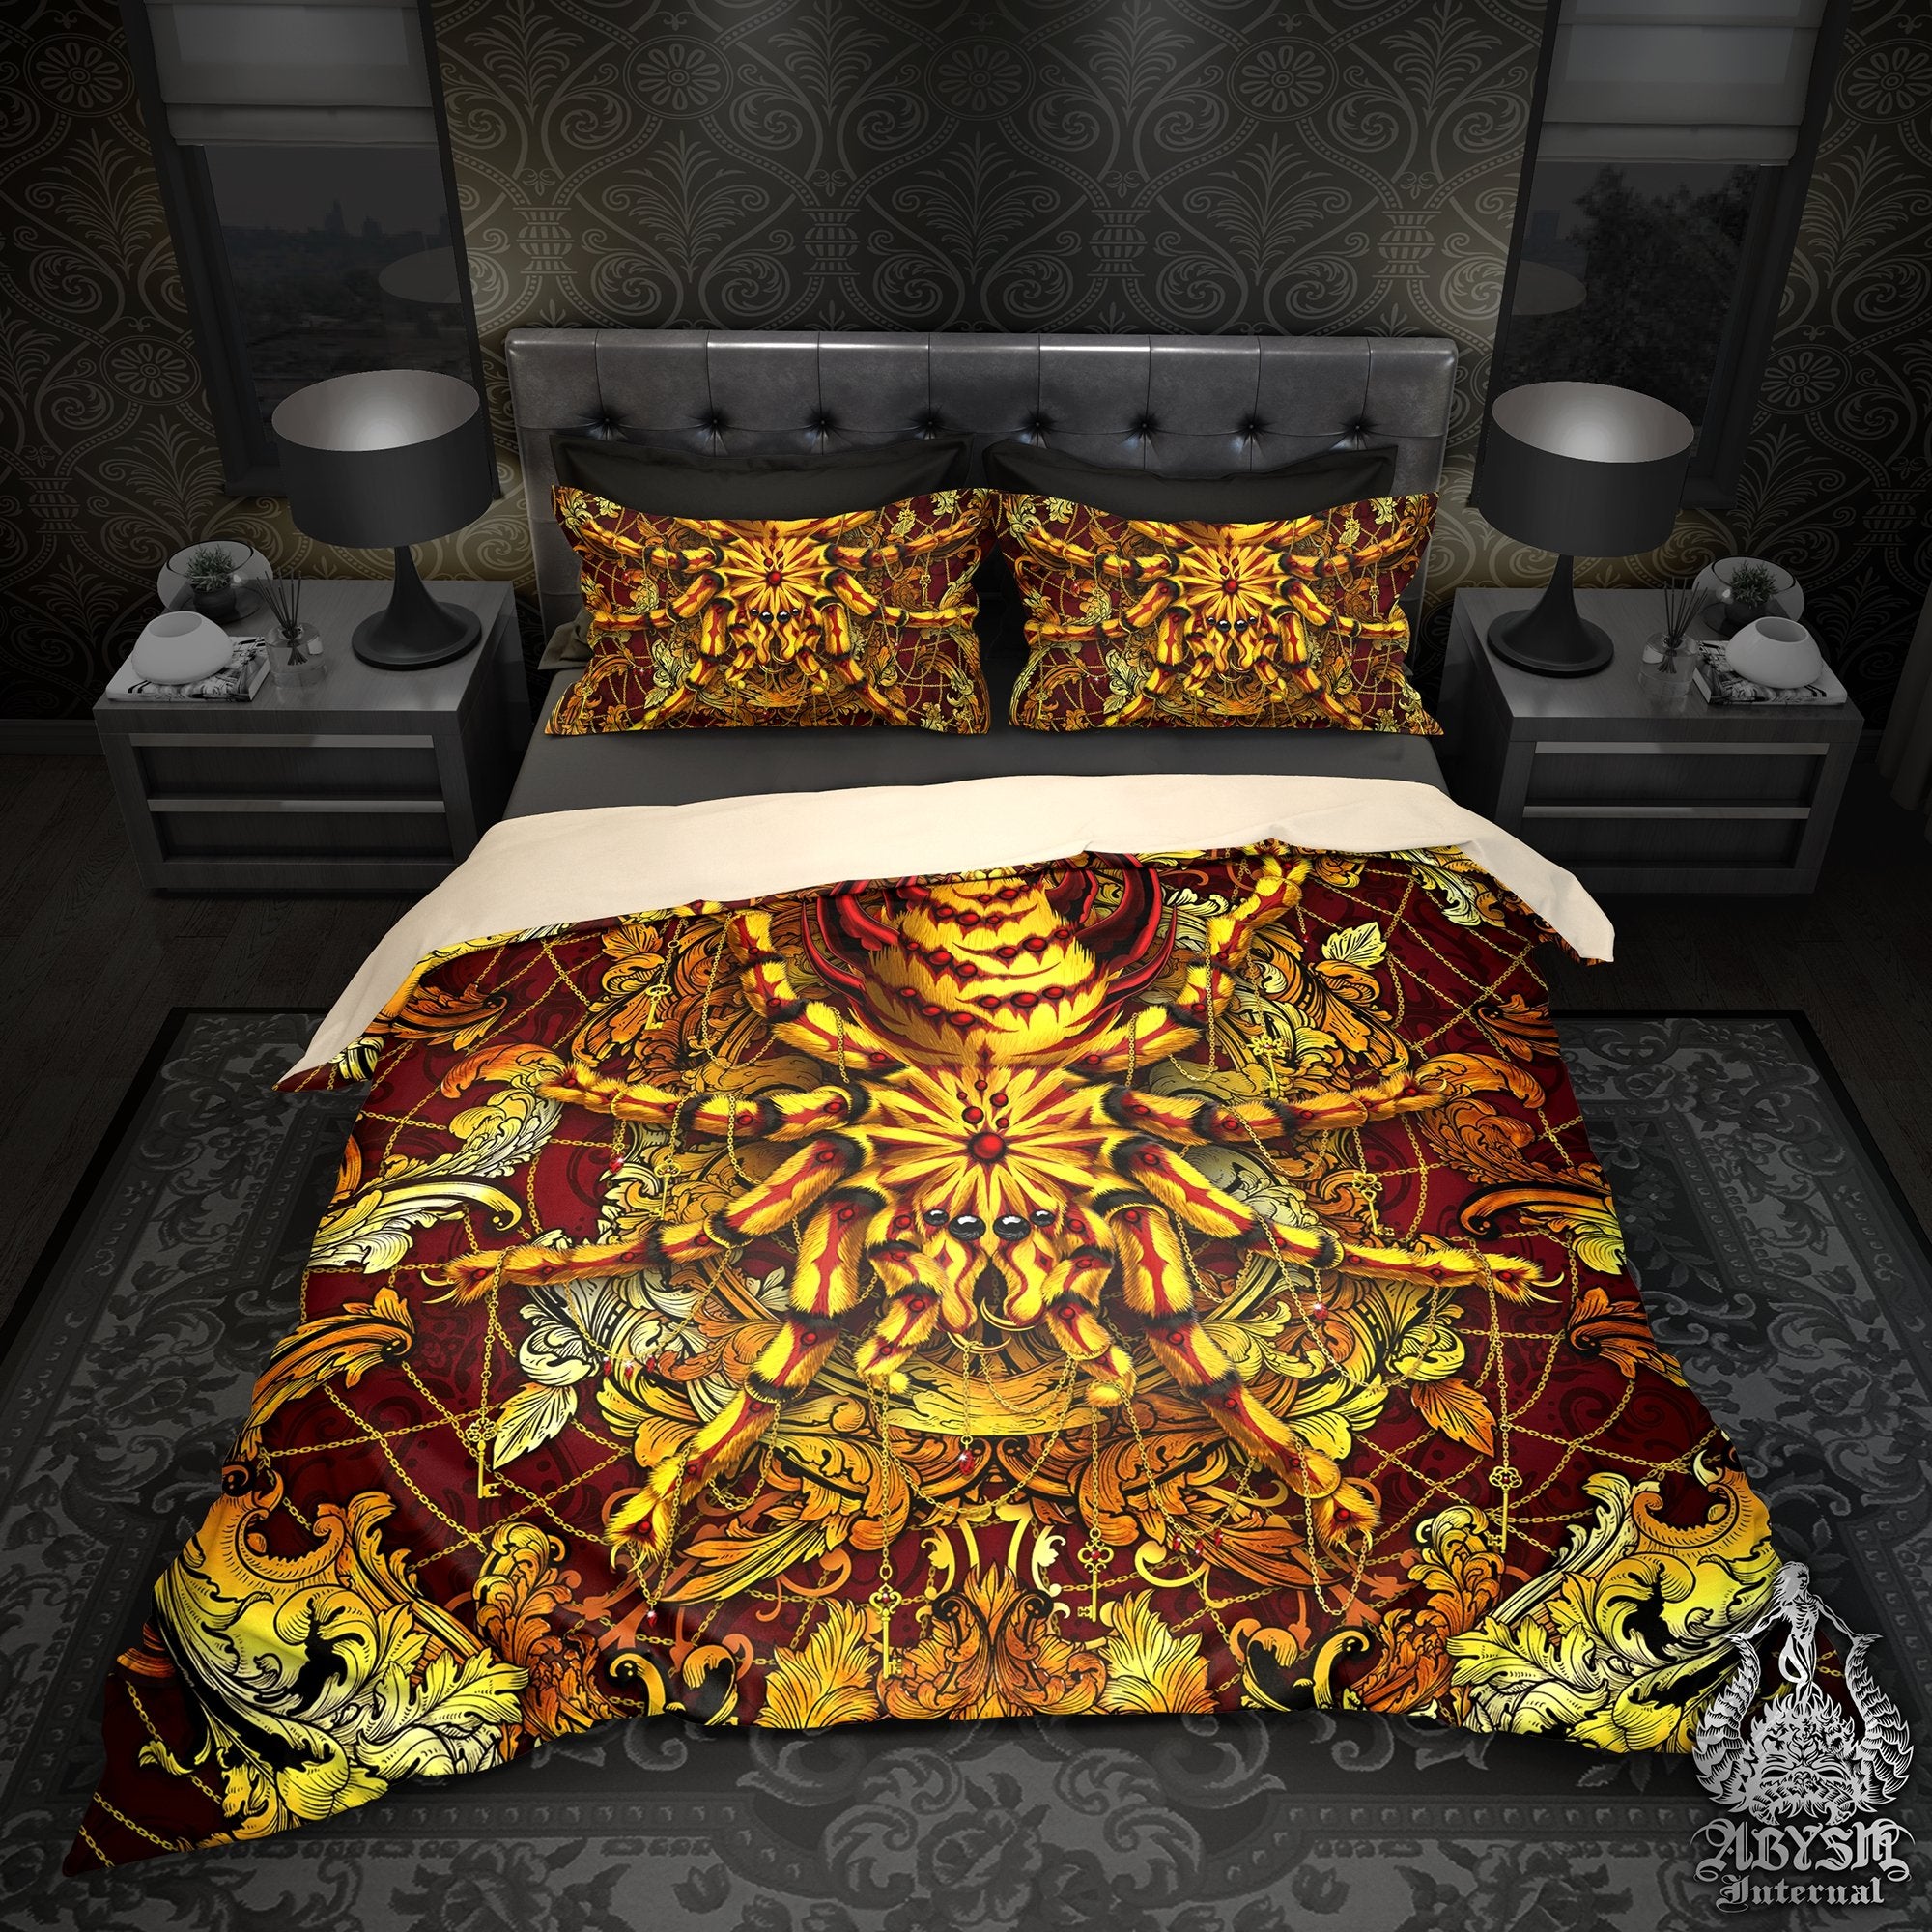 Spider Bedding Set, Comforter and Duvet, Bed Cover and Bedroom Decor, King, Queen and Twin Size - Tarantula Gold Red - Abysm Internal